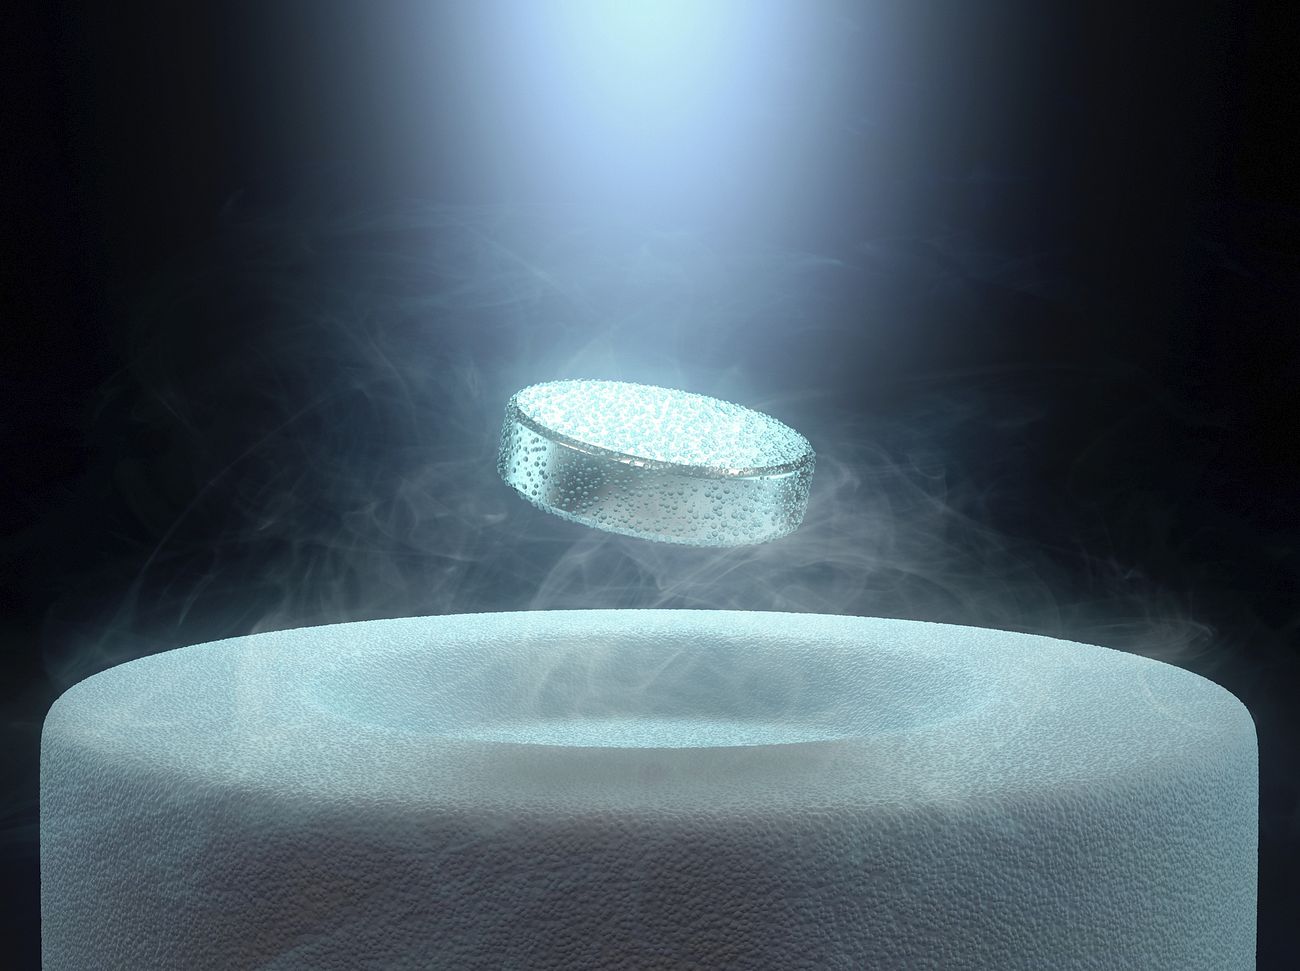 Newly discovered superconductor state opens